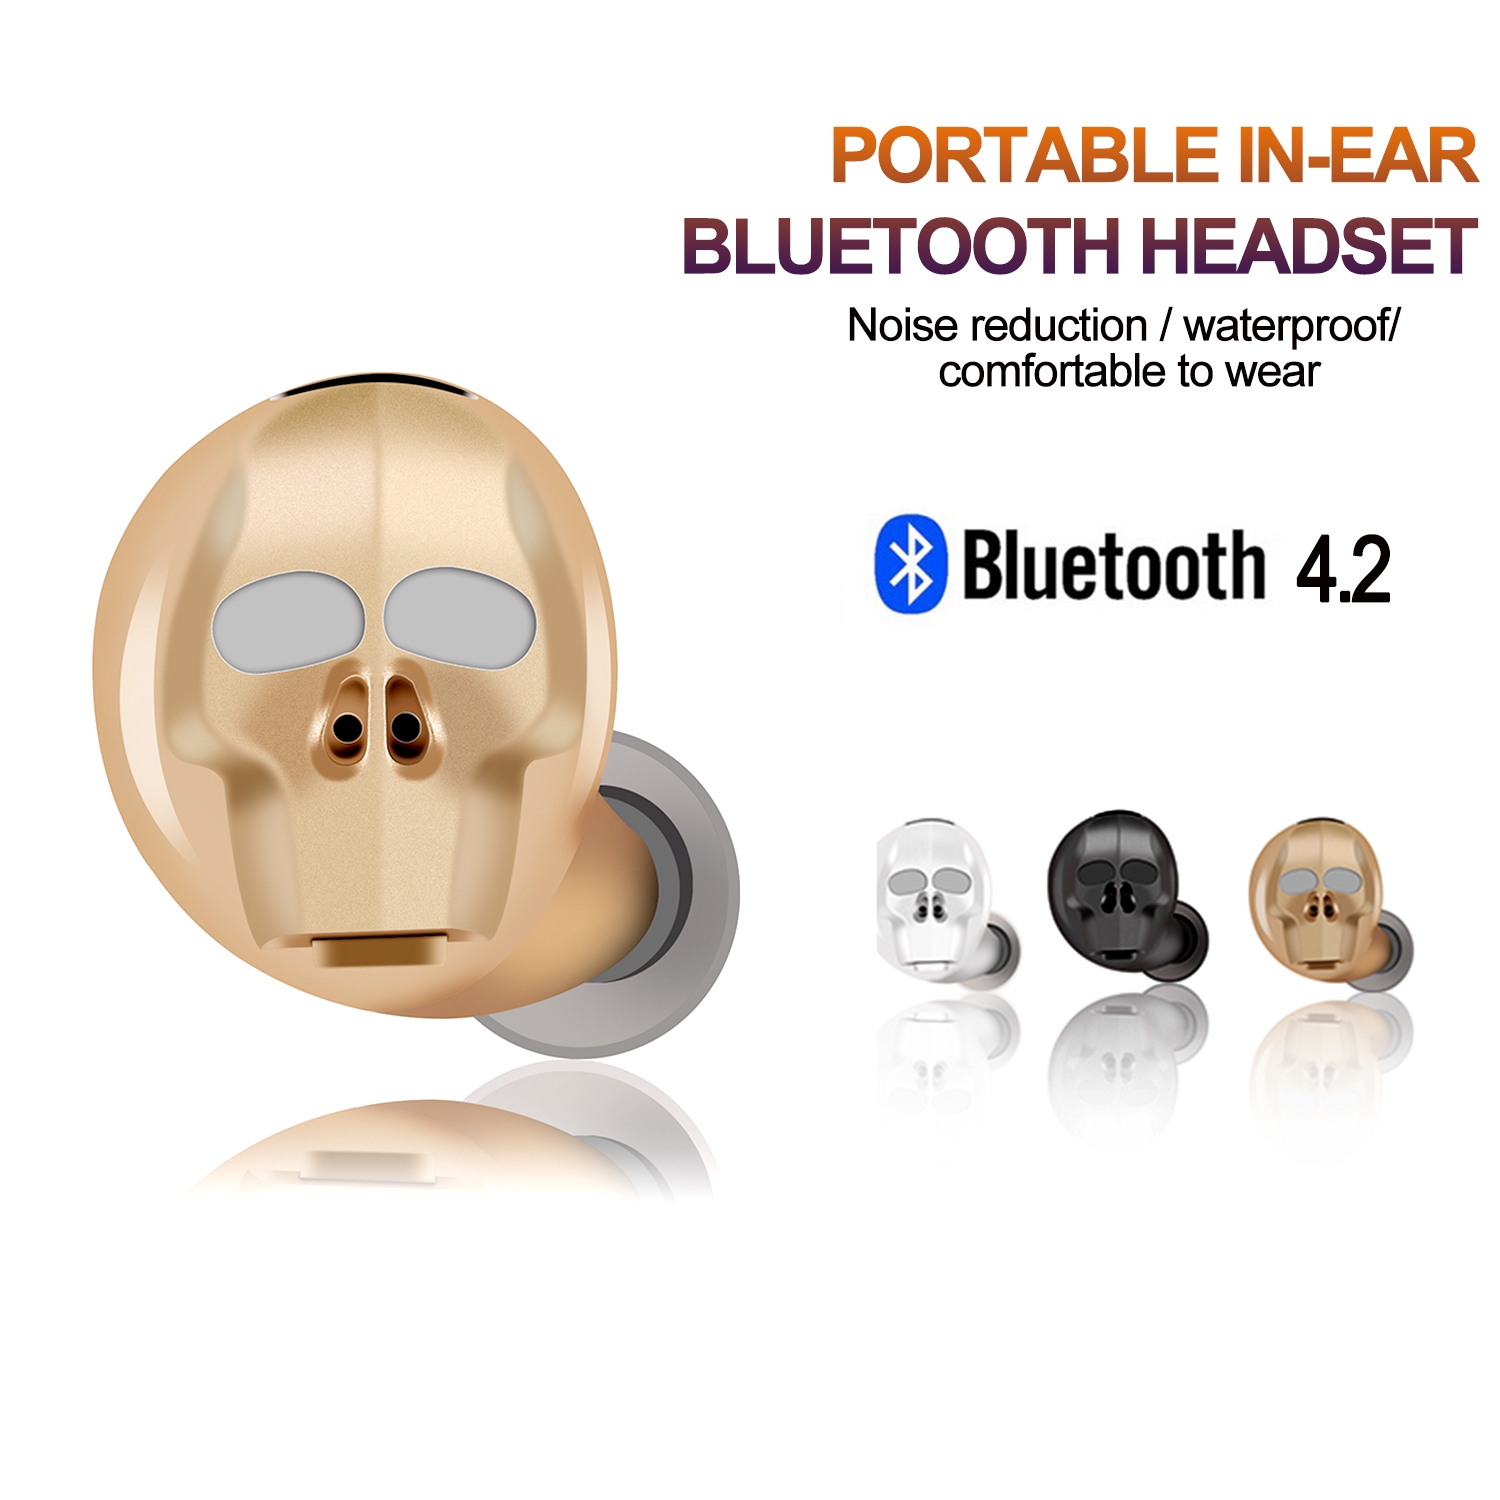 Wireless Bluetooth 4.2 Headset Stereo personality Headphones Earphone For IPhone Samsung HTC